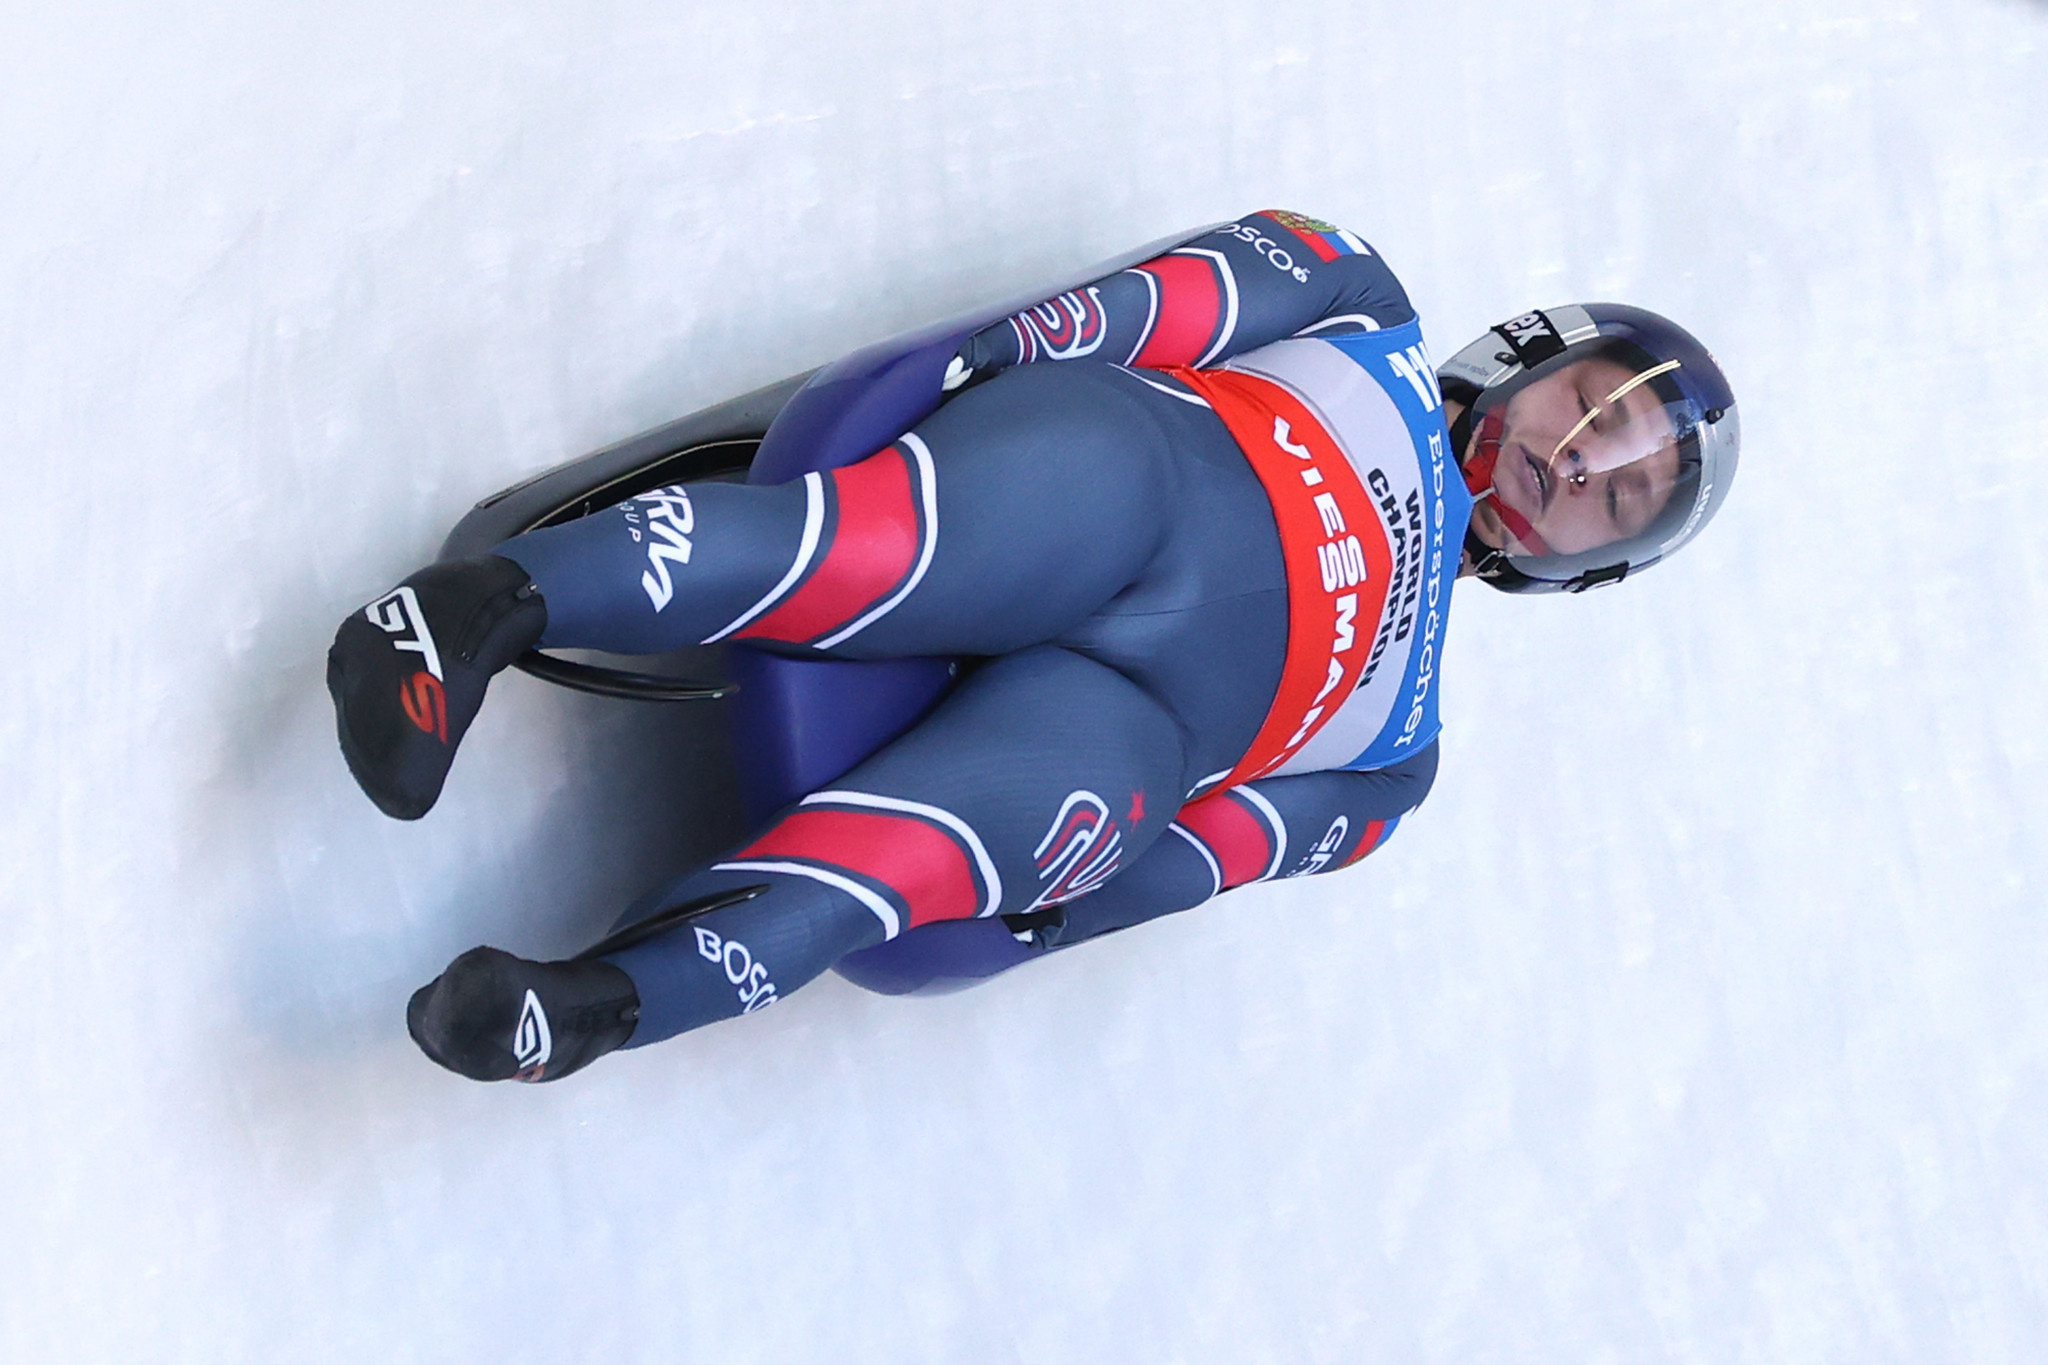 Luge: A professional luger competes at the International winter sports championship. 2050x1370 HD Wallpaper.